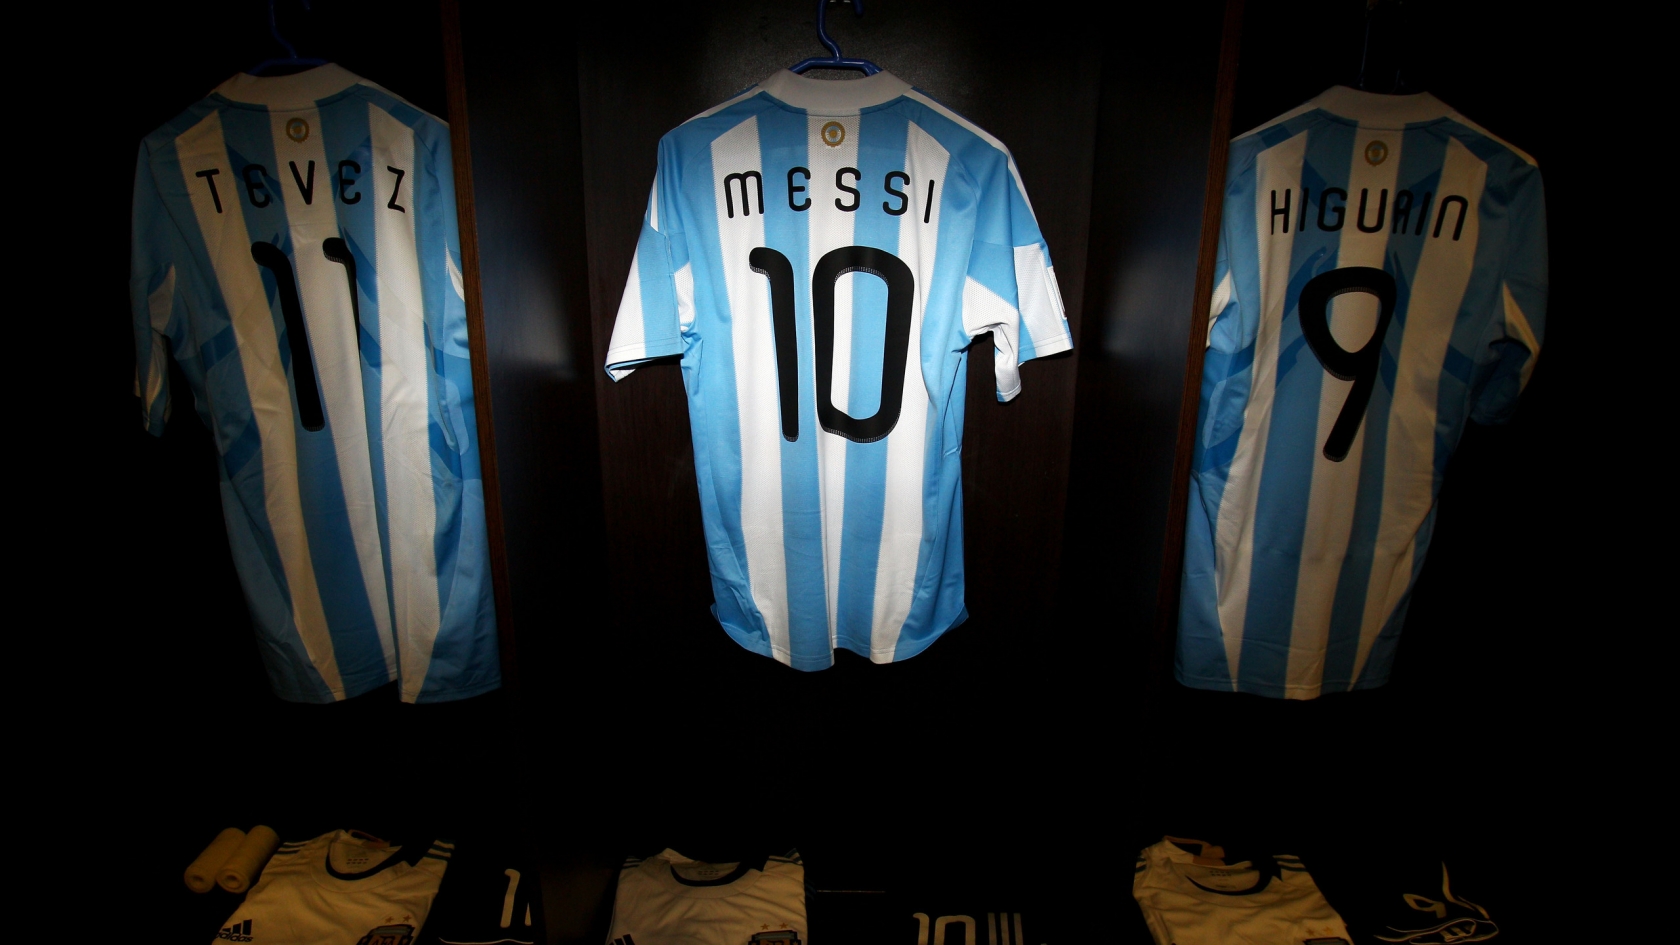 Tshirt of Messi, Tevez and Higuain for 1680 x 945 HDTV resolution